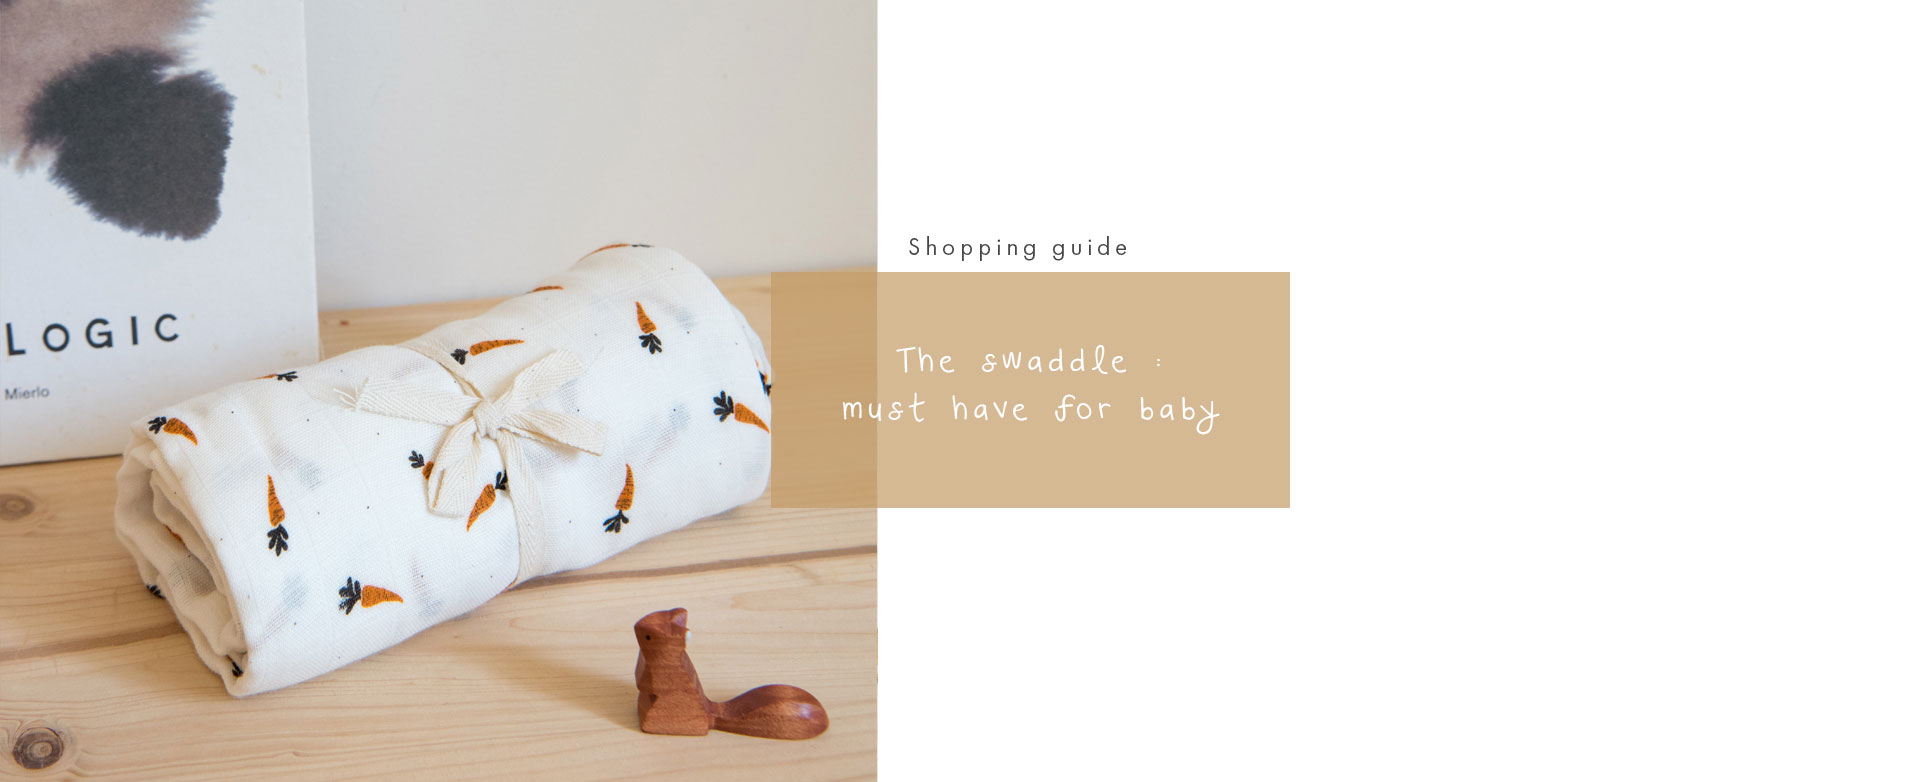 Shopping guide : Baby swaddle